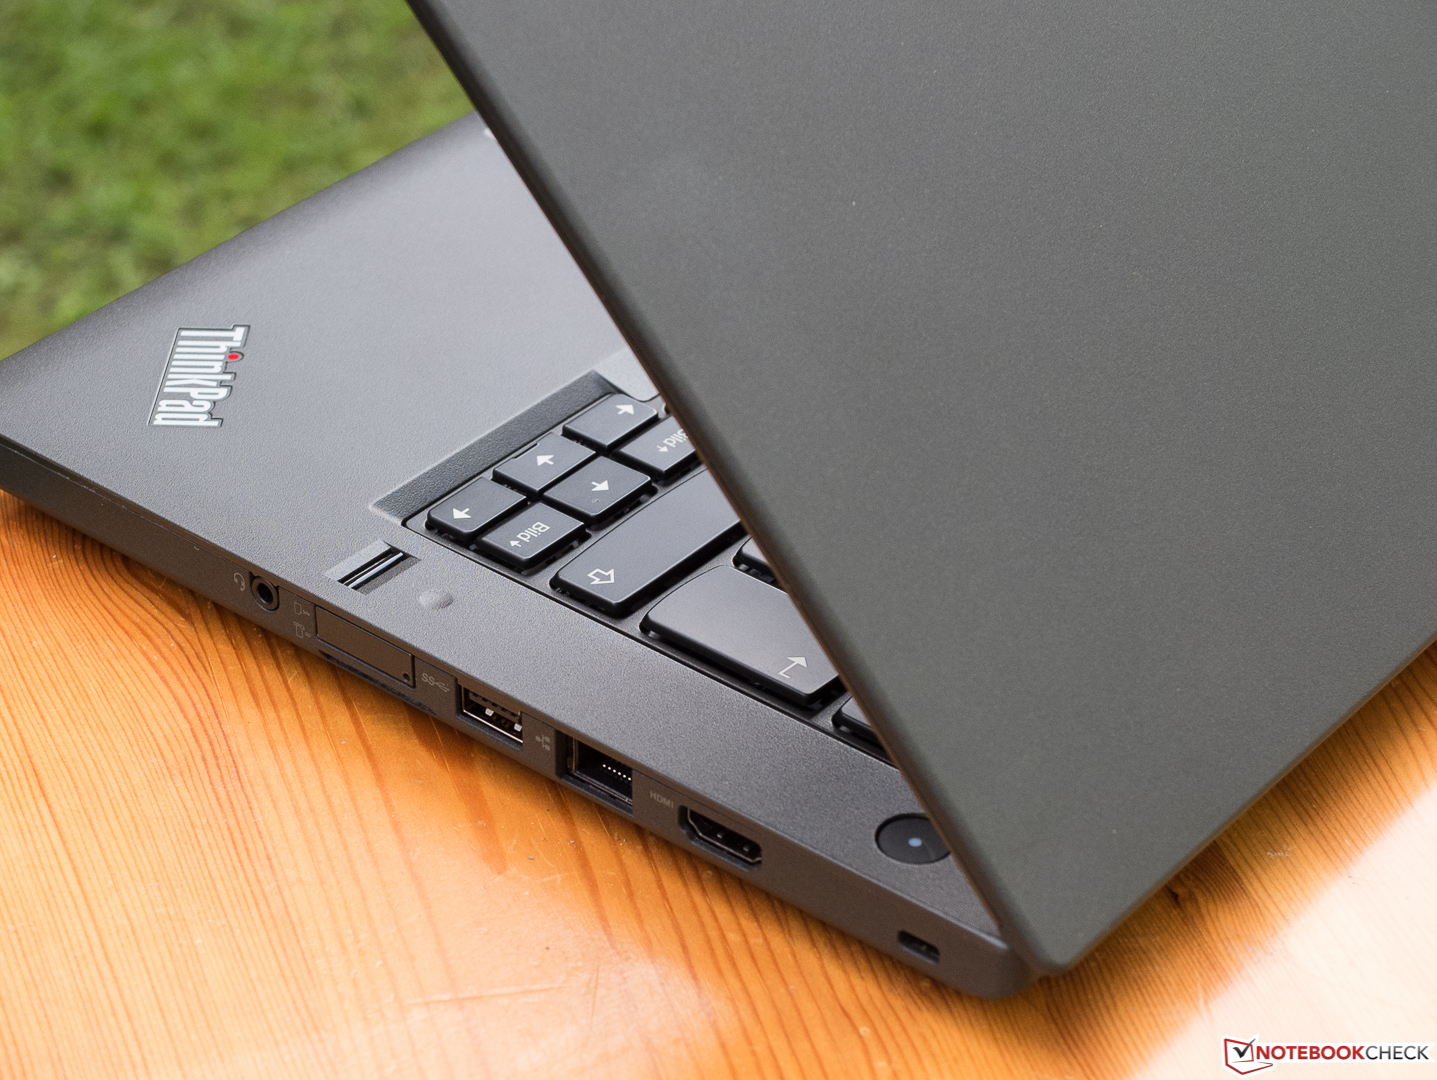 Lenovo ThinkPad T460 (Core i5, FHD) Notebook Review